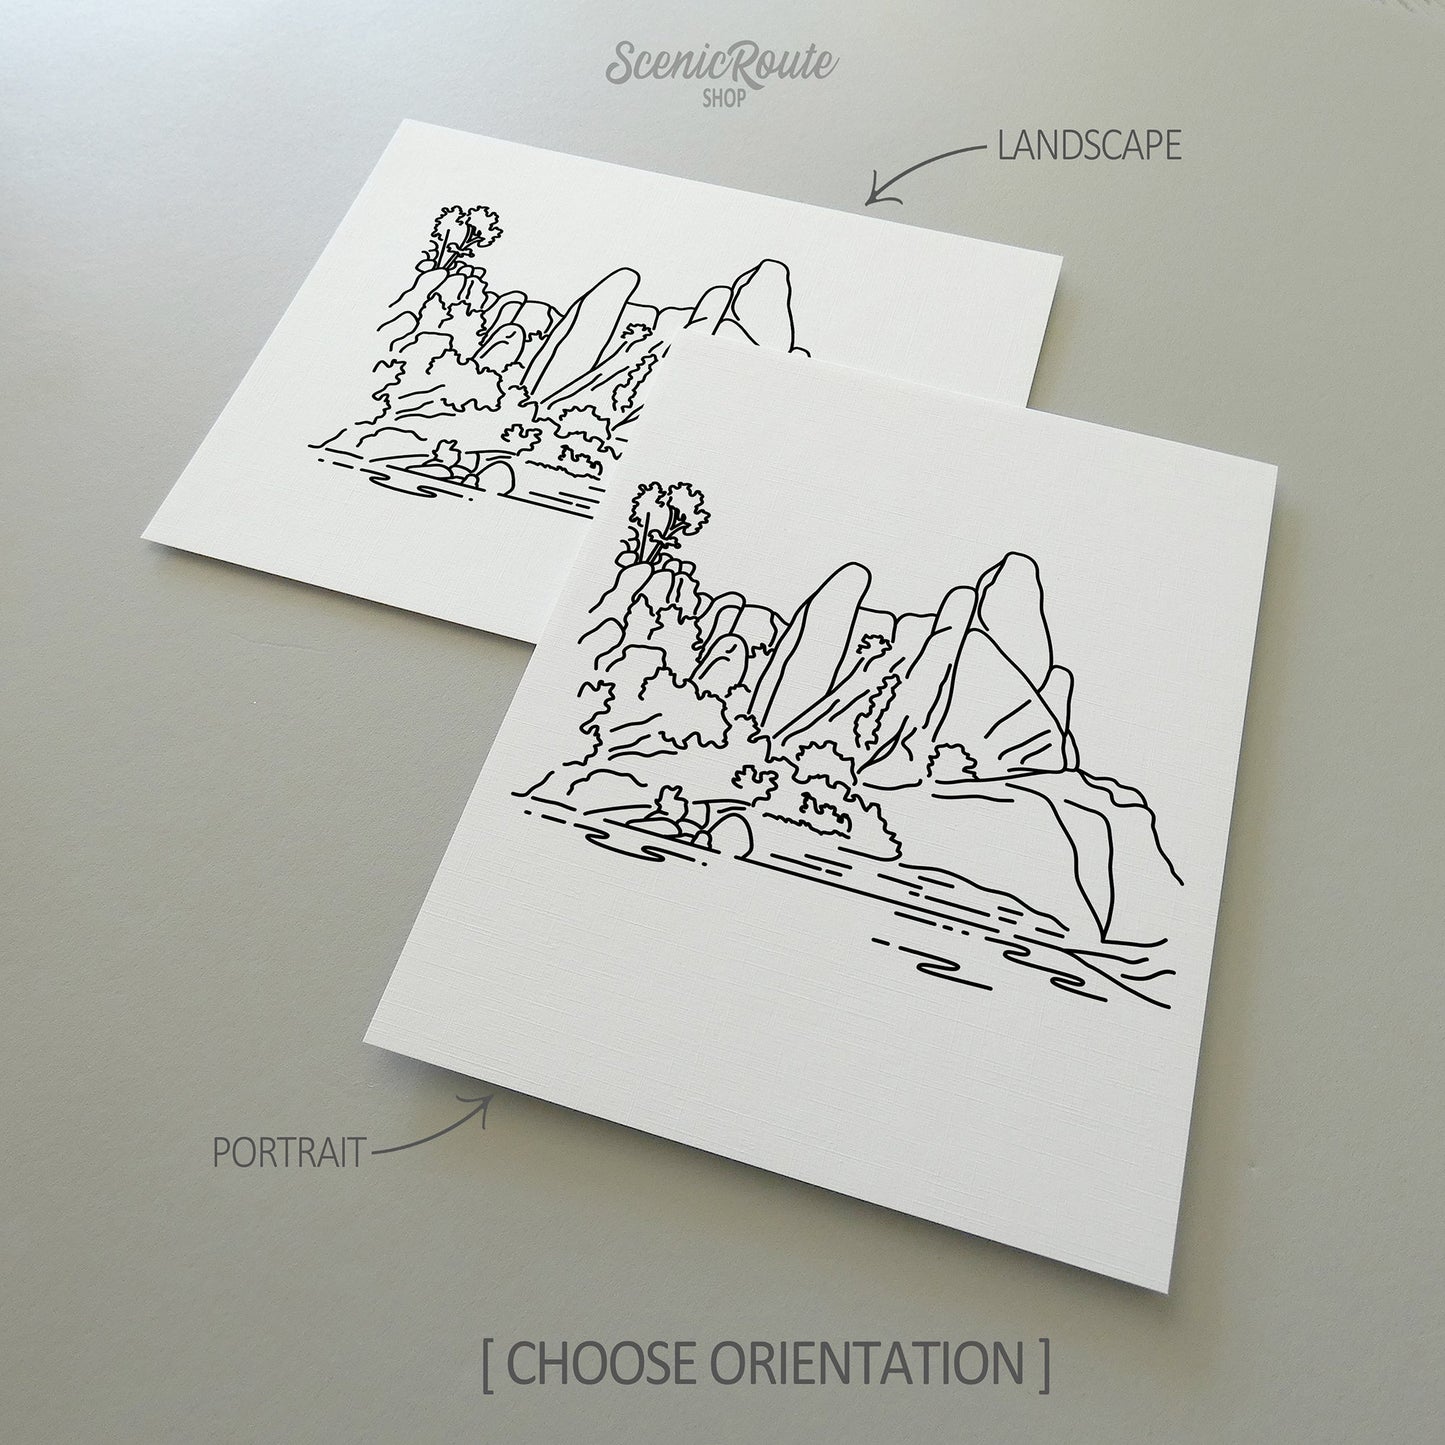 Two line art drawings of Pinnacles National Park on white linen paper with a gray background.  The pieces are shown in portrait and landscape orientation for the available art print options.